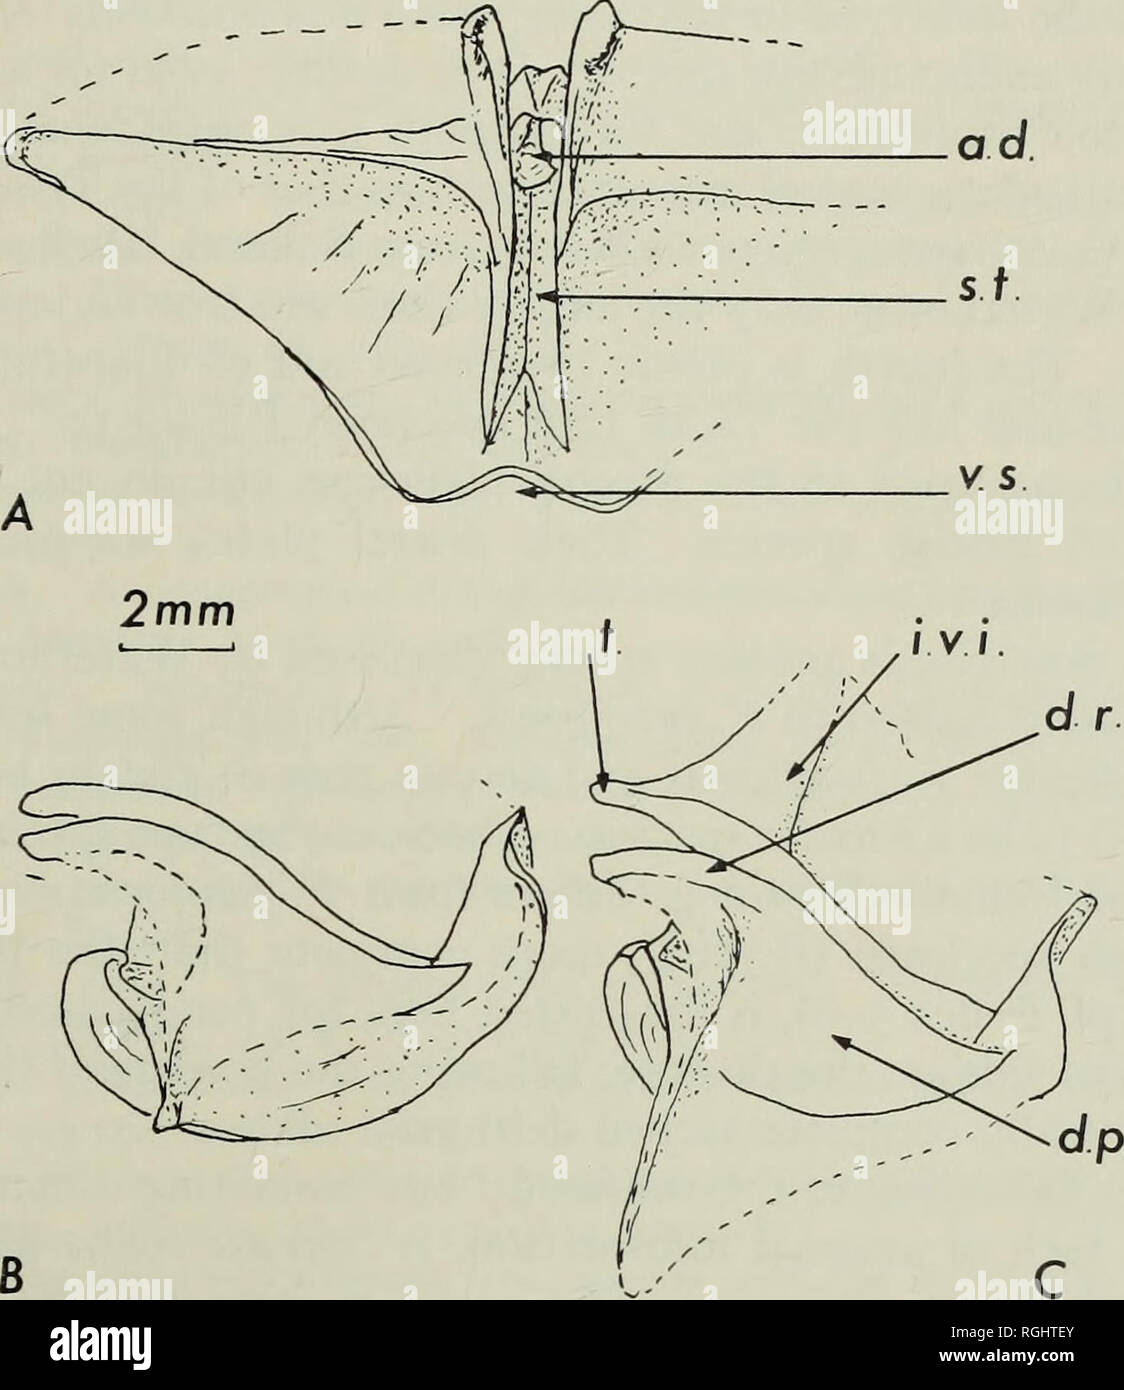 . Bulletin of the British Museum (Natural History), Geology. L. CARBONIFEROUS BRACHIOPOD -ir ad 281. Fig. 2. Camera-lucida drawings of a silicified ventral valve of F. rhomhoidea (Phillips) from the Visean of Co. Fermanagh, Ireland. A, posterior view ; B, lateral view ; C, ventrolateral view. a.d. - apex of the delthyrium, filled by secondary shell material; d.p. - dental plate ; d.r. - dental ridges bordering the interior surfaces of the edges of the delthyrium. Anteroventrally these ridges are supported by the dental plates which buttress across the ventral shell cavity, i.v.i. - internal s Stock Photo